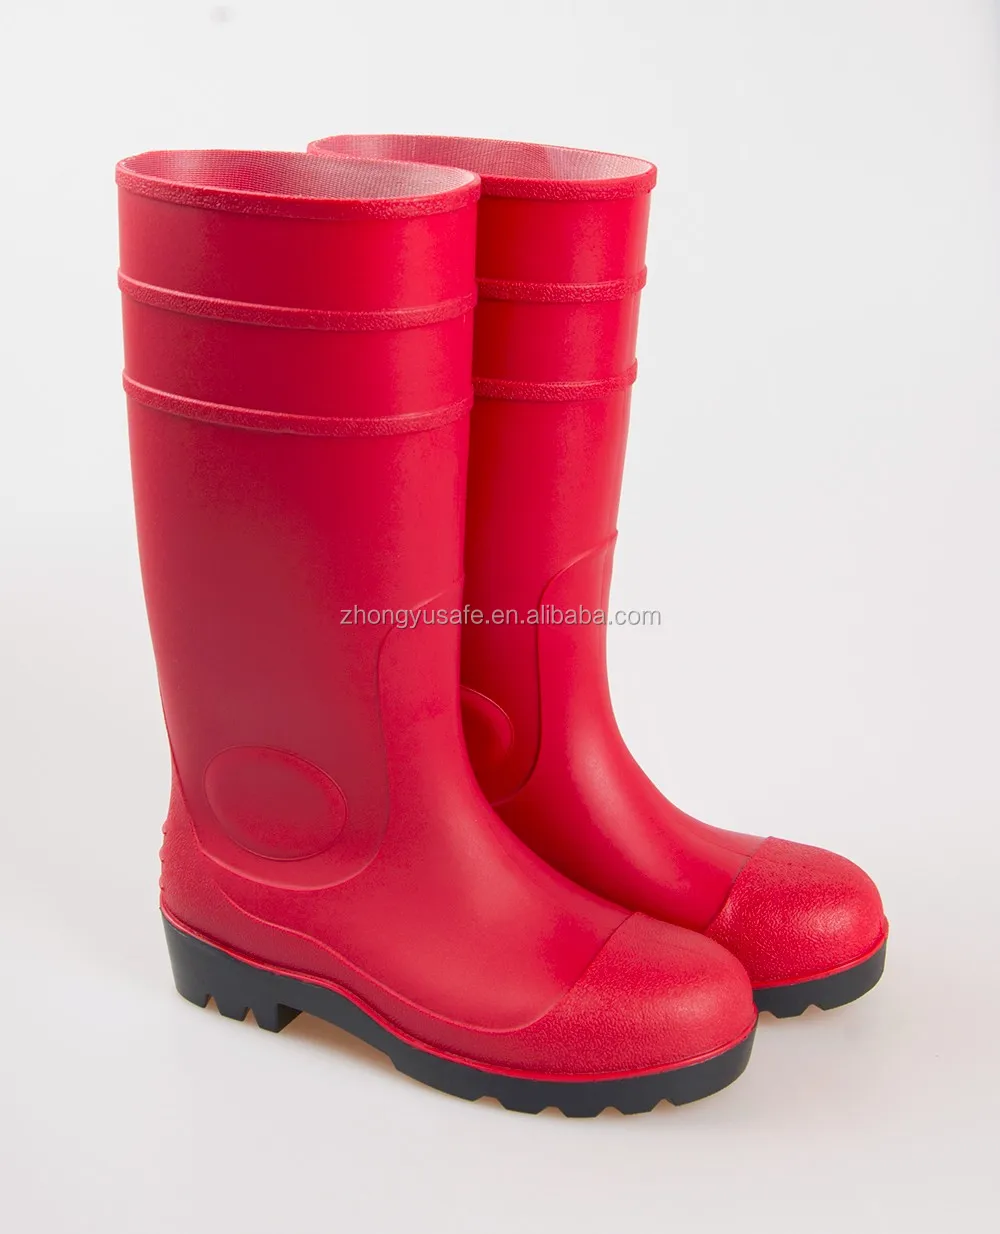 gumboots for farming